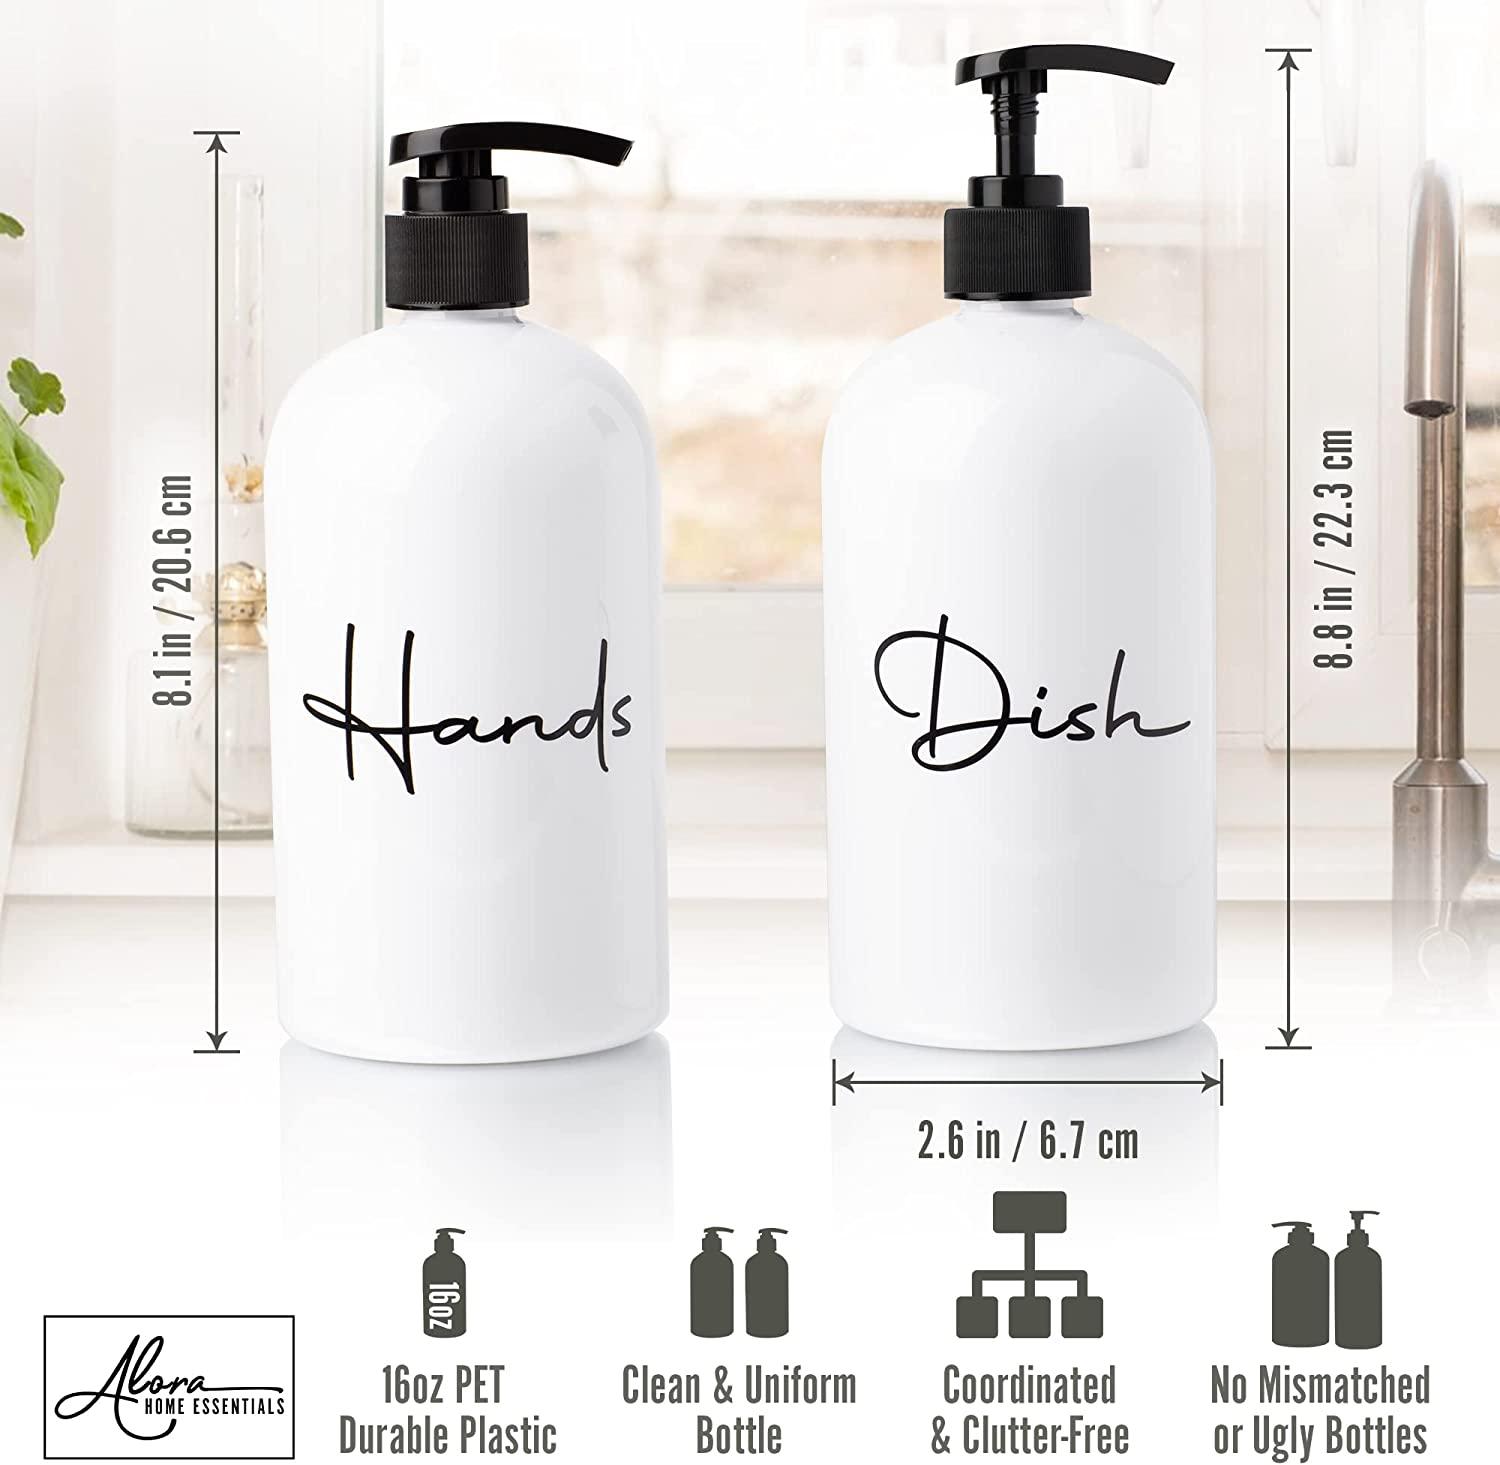 Alora Hand Soap Dispenser and Liquid Dish Soap Dispenser for Kitchen Sink -  Set of 2 - Extra Wide Hand Pump Reusable Plastic Bottle with Easy to Read  Lettering - Countertop Replacement Refill